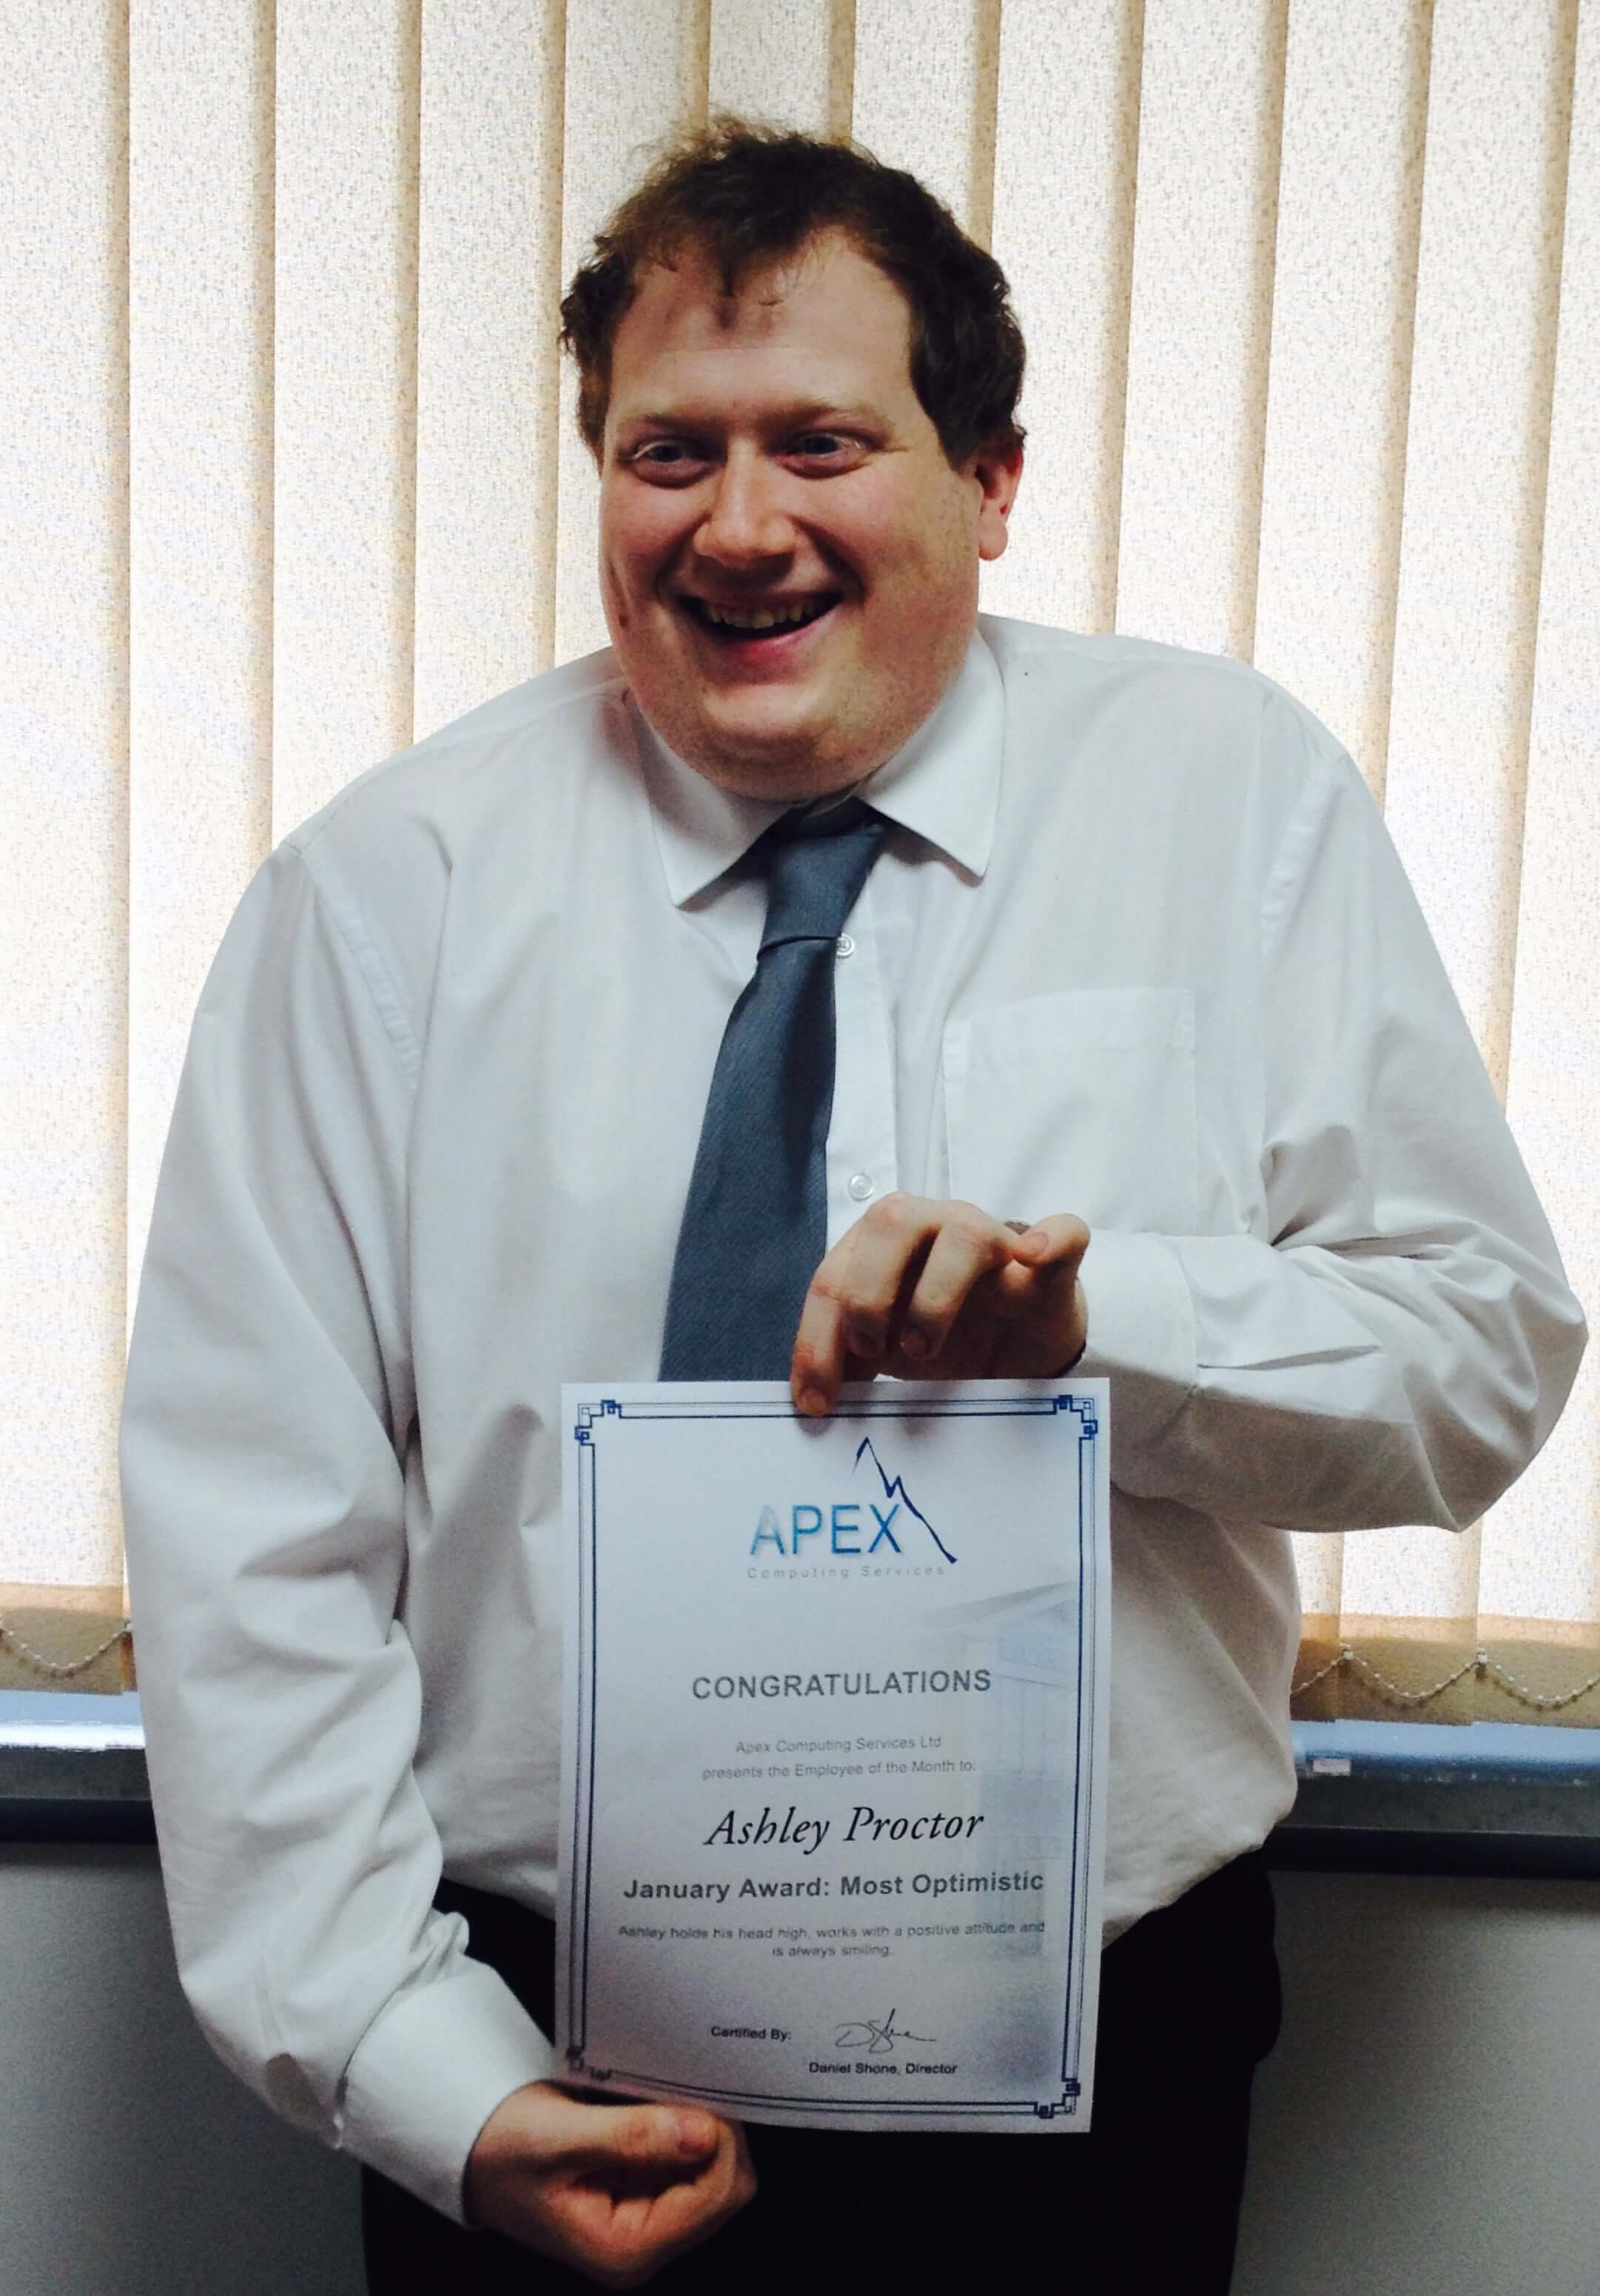 Ashley Proctor wins the January 'Employee of the Month'!